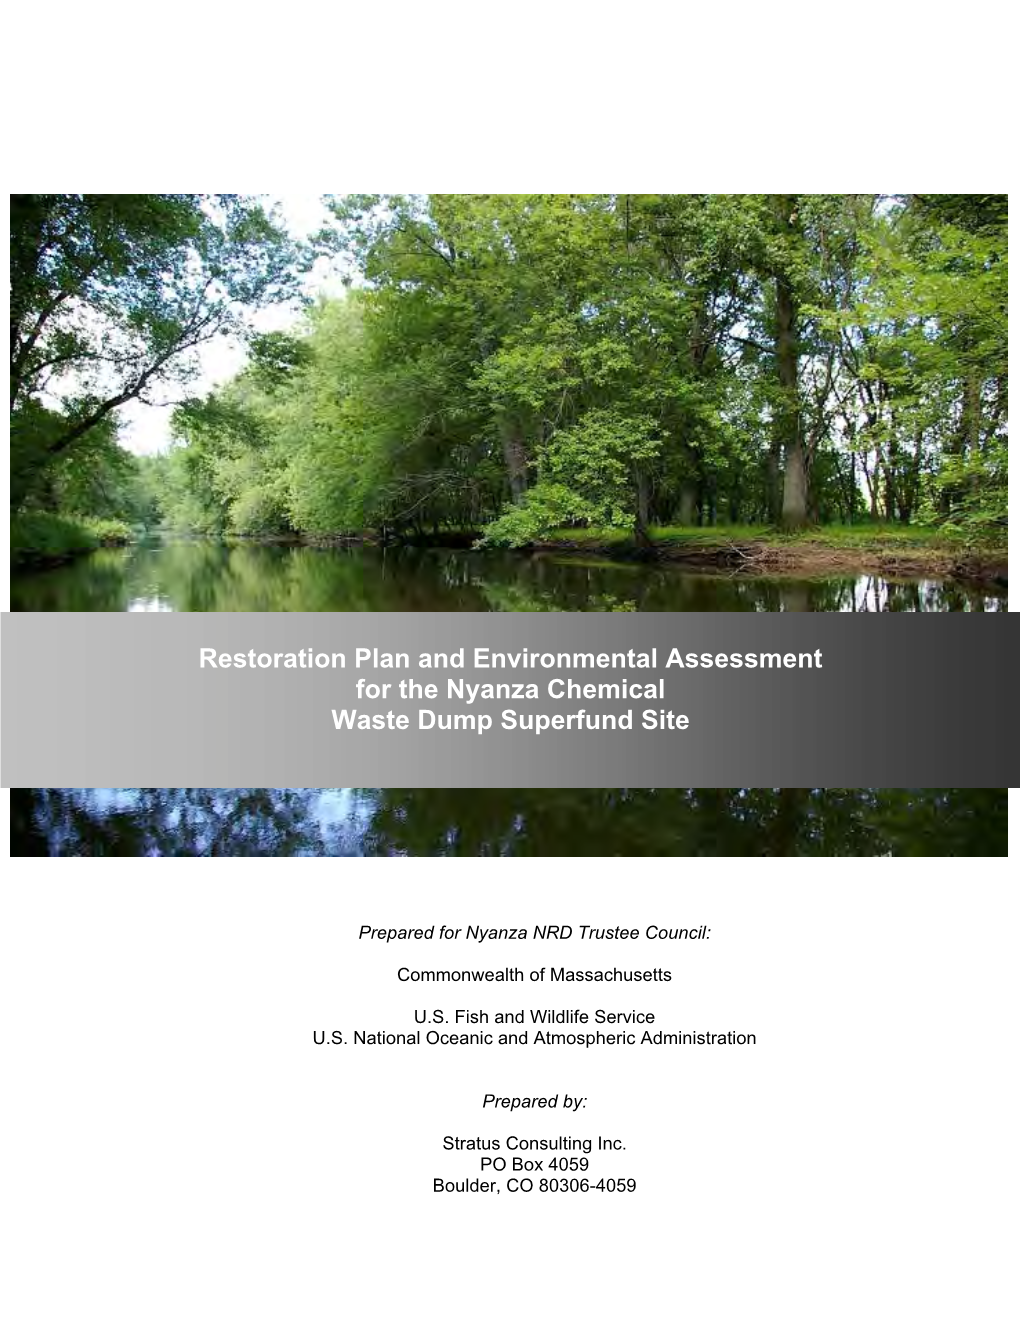 Restoration Plan and Environmental Assessment for the Nyanza Chemical Waste Dump Superfund Site